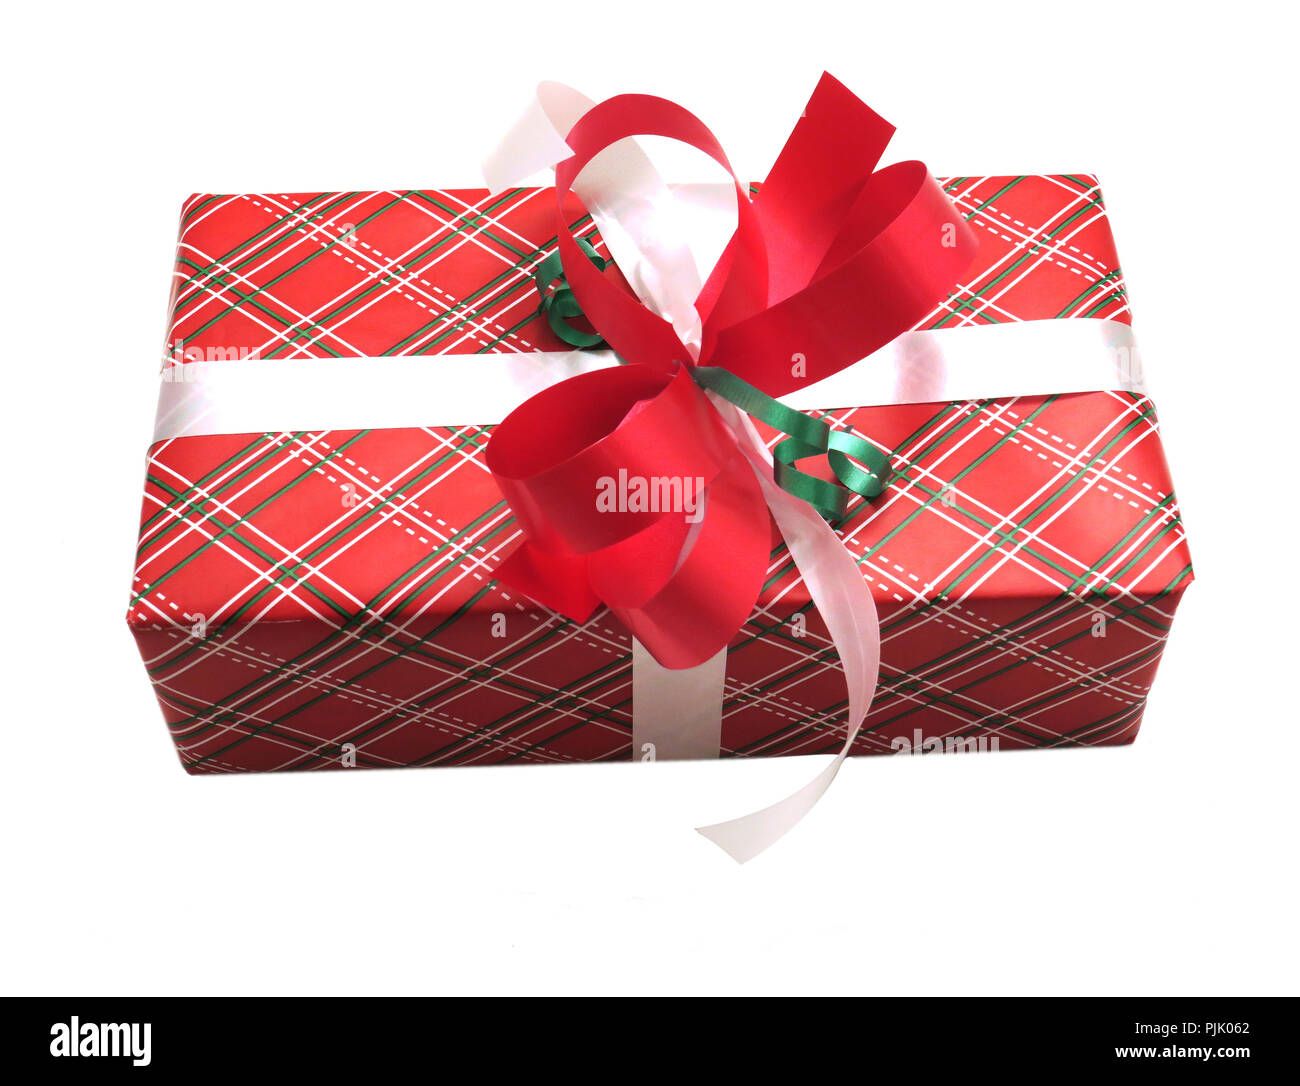 Christmas present wrap with a decorative red and white bow Stock Photo